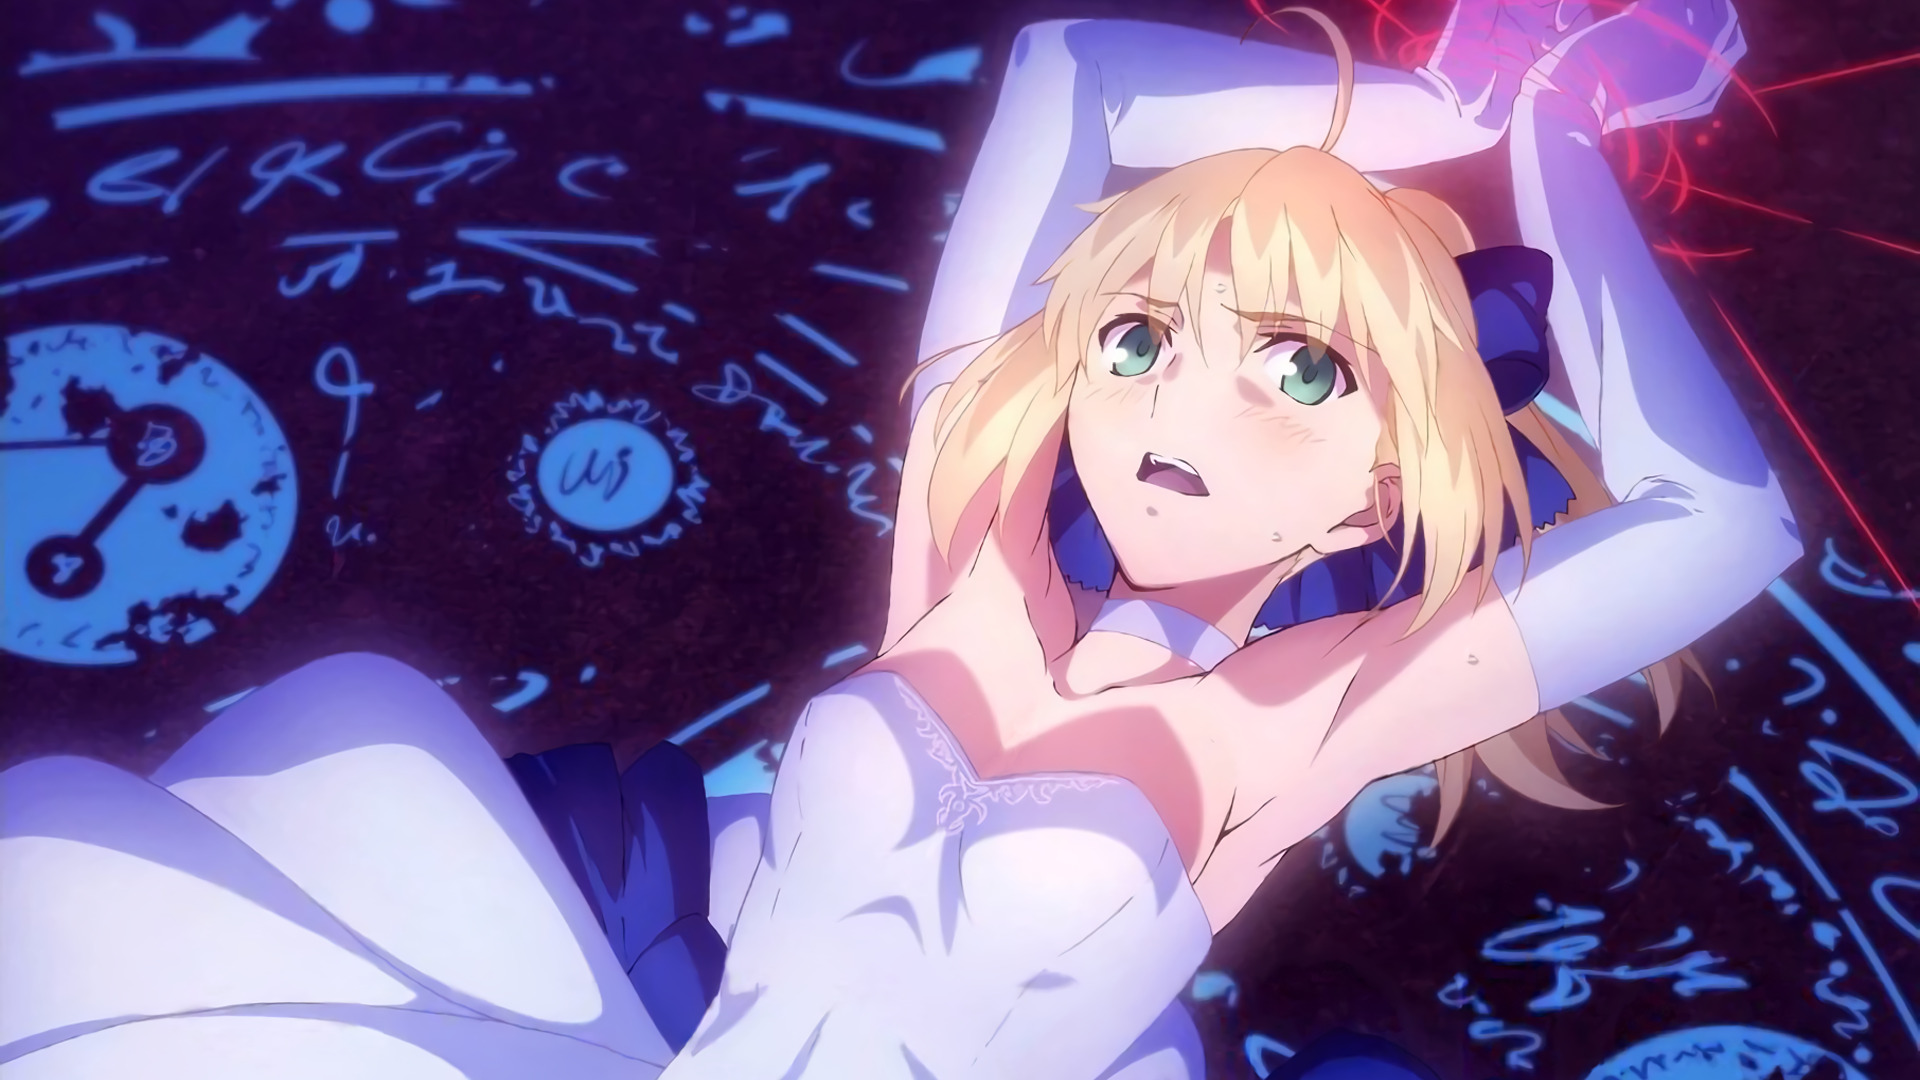 Saber Fate/Stay Night: Unlimited Blade Works